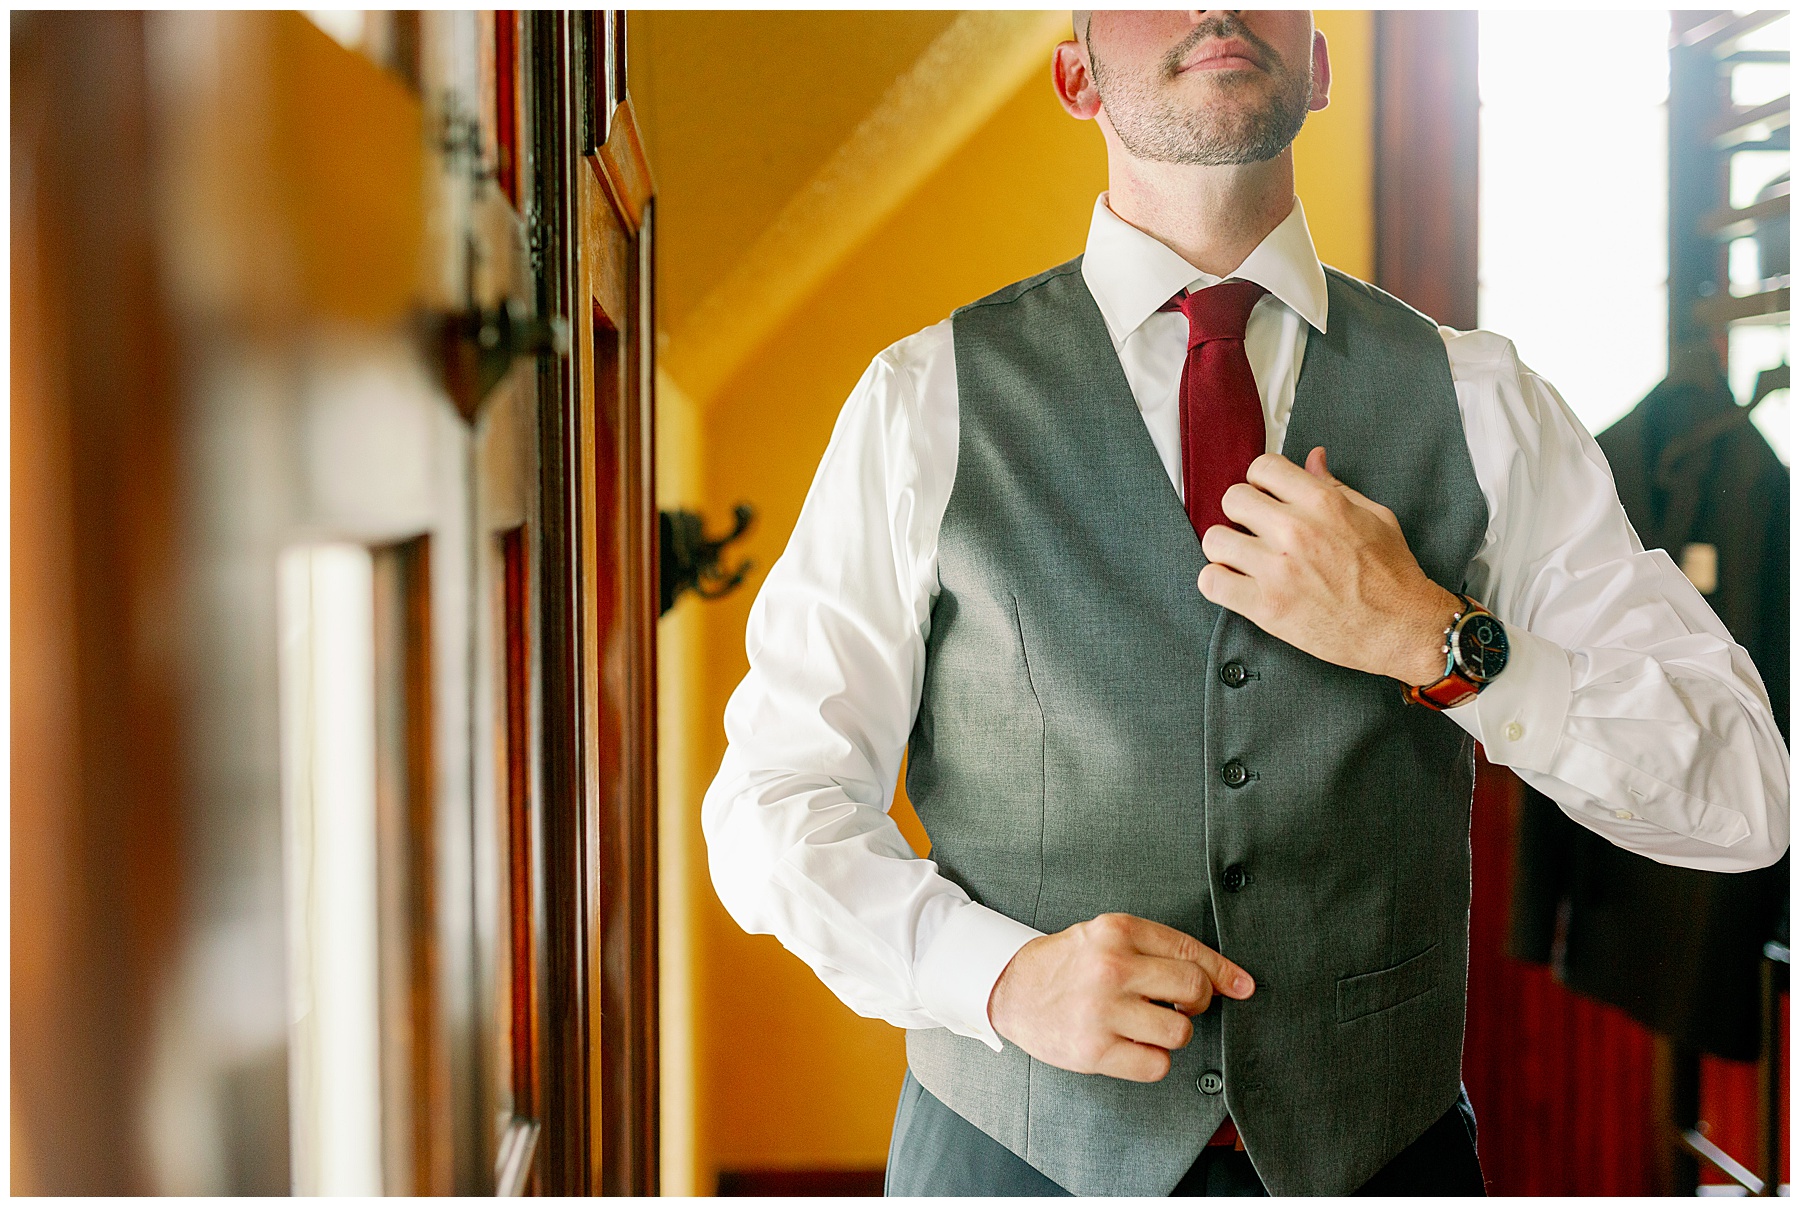 Groom gets ready for his wedding wearing a grey suit and burgundy tie